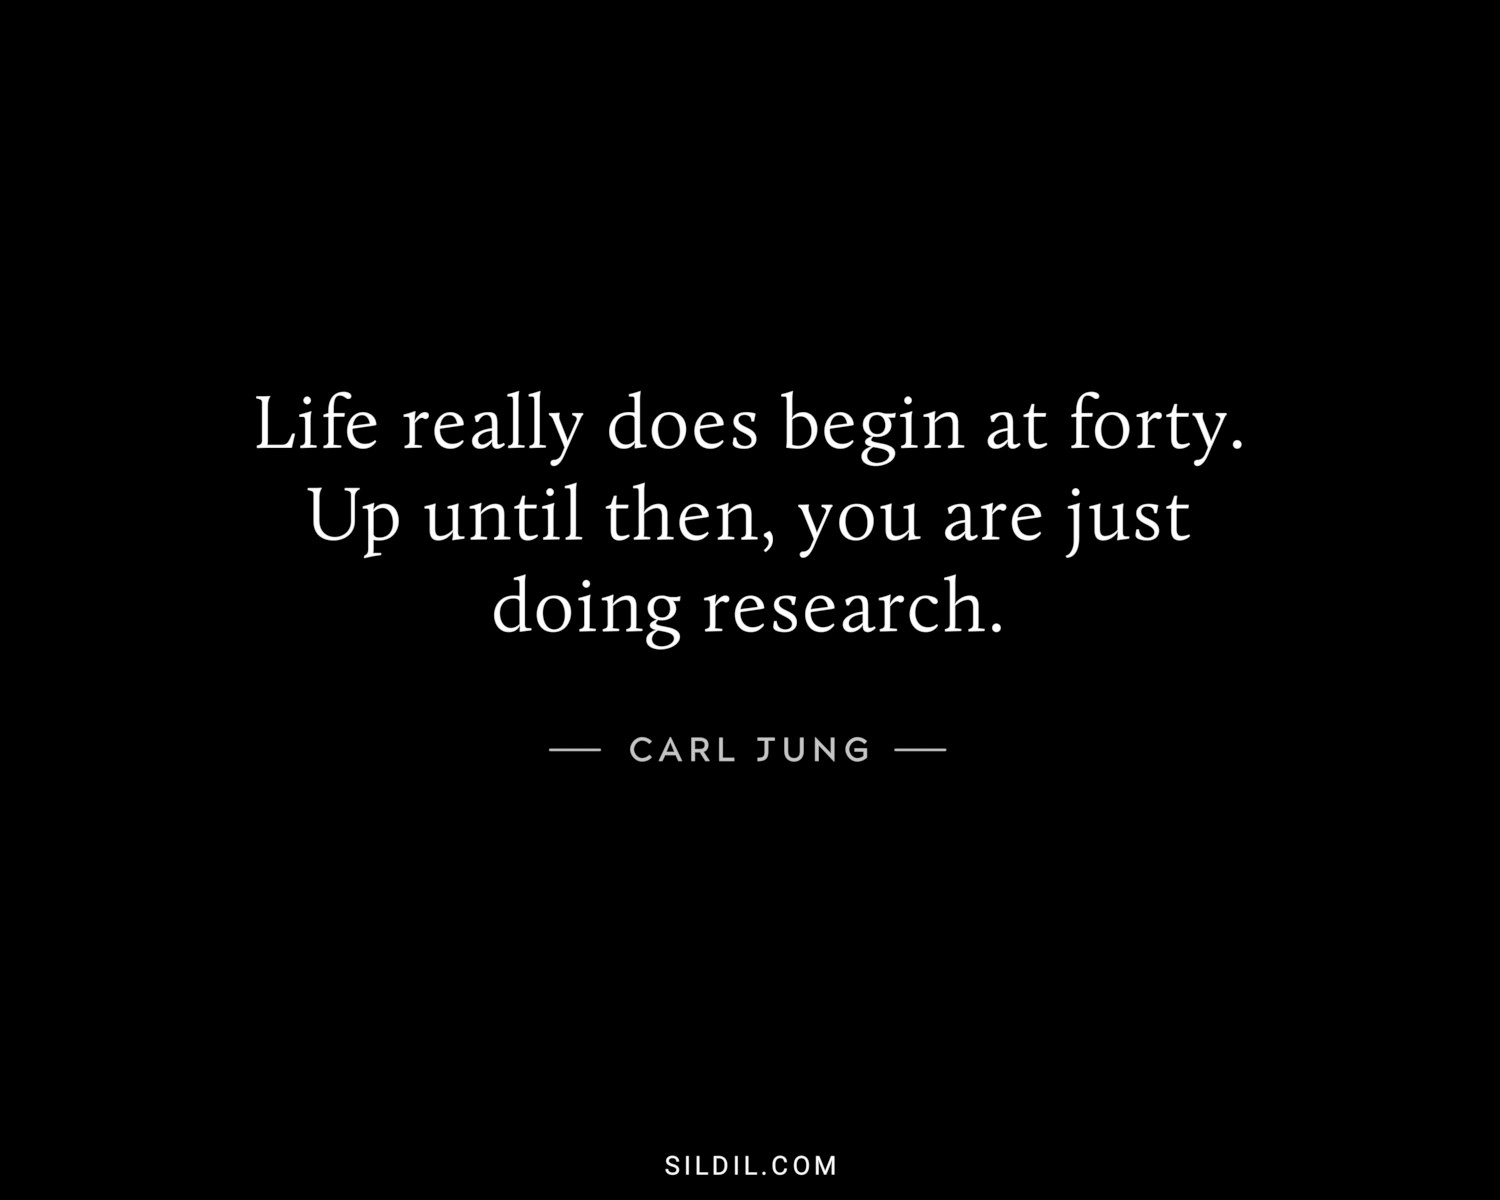 Life really does begin at forty. Up until then, you are just doing research.